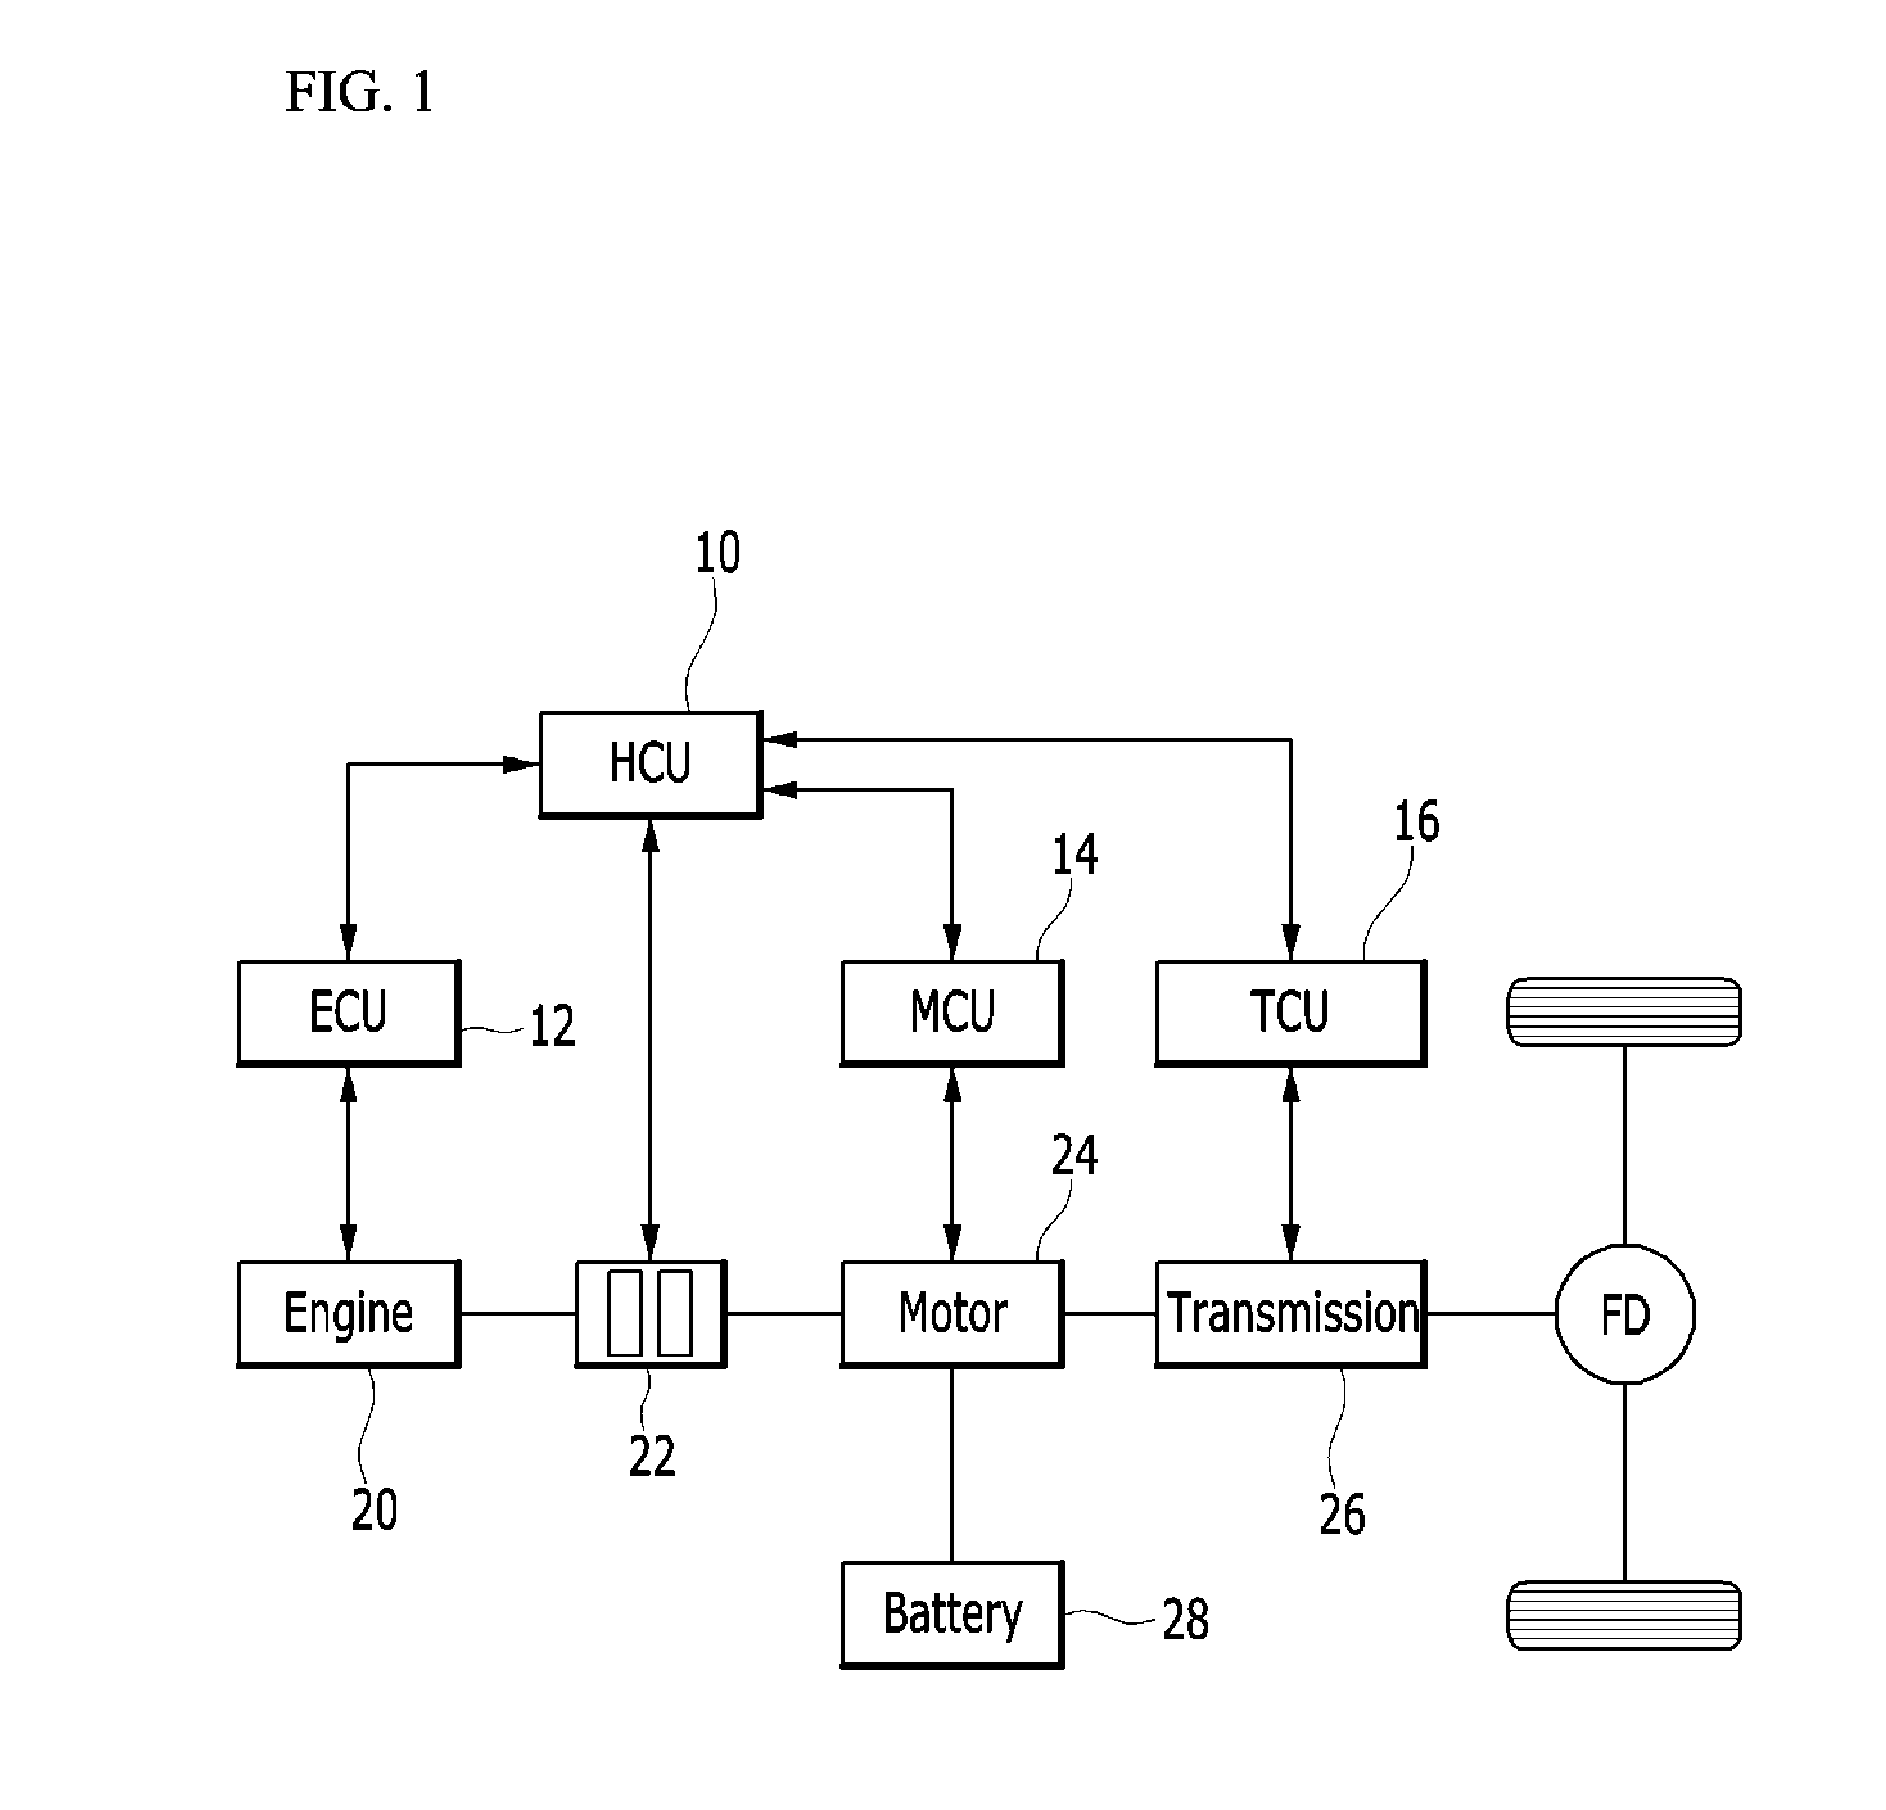 Apparatus and method for controlling creep torque of hybrid electric vehicle